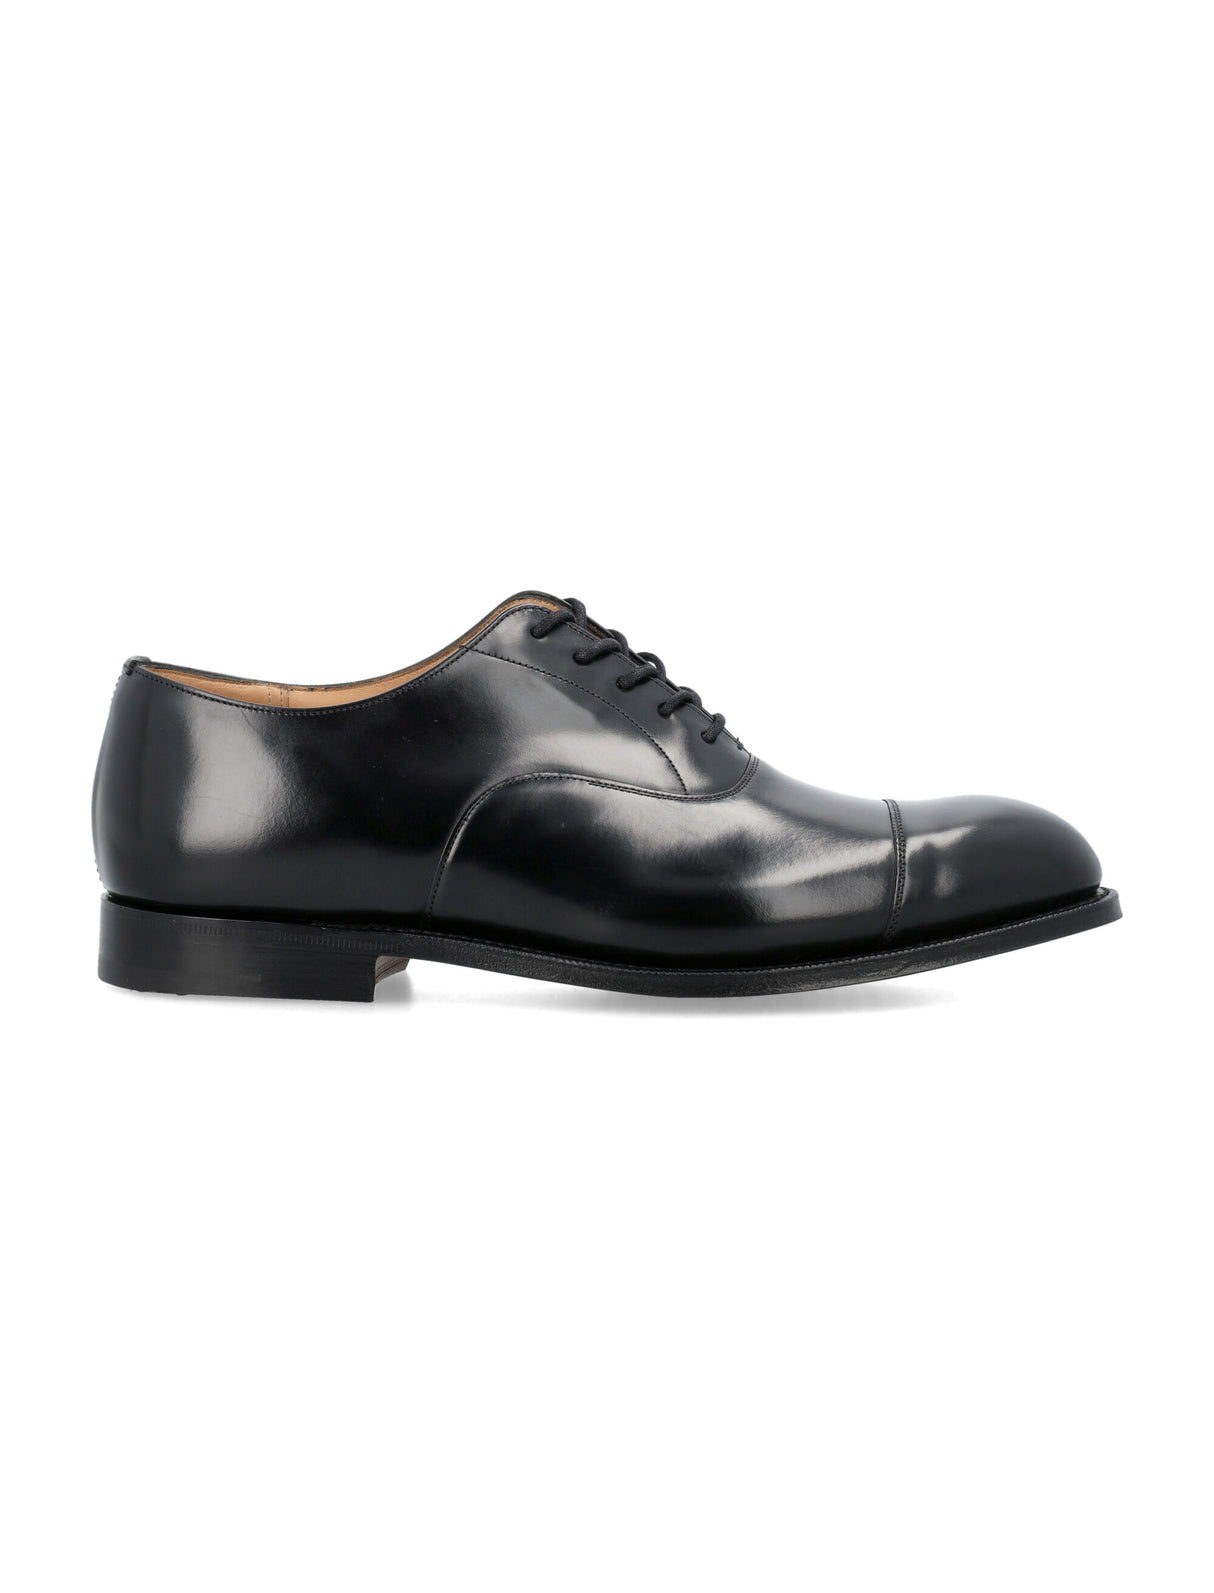 CHURCH'S Men's Leather Derby Dress Shoes with Cap Toe Stitching